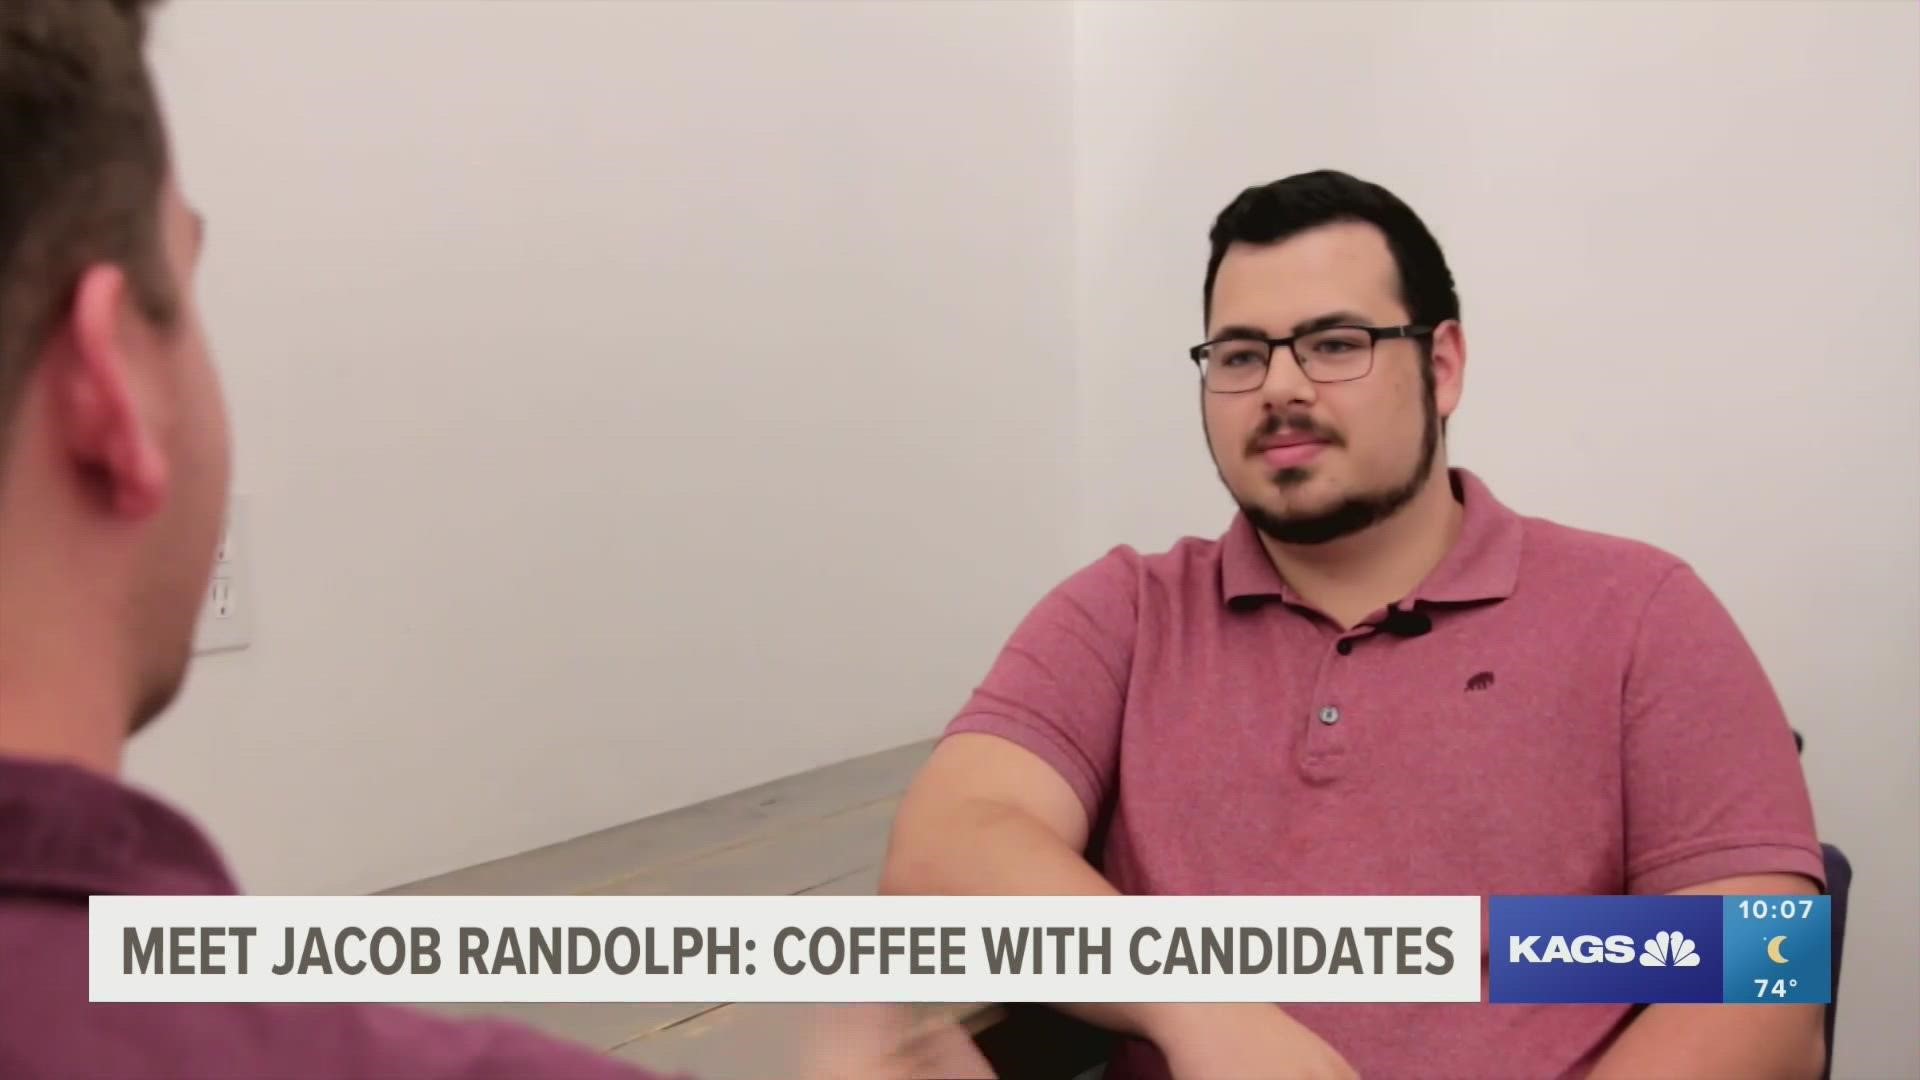 Jacob Randolph, 24, is the youngest of the candidates running for College Station Mayor, but he says this is what makes him stand out from his opponents.